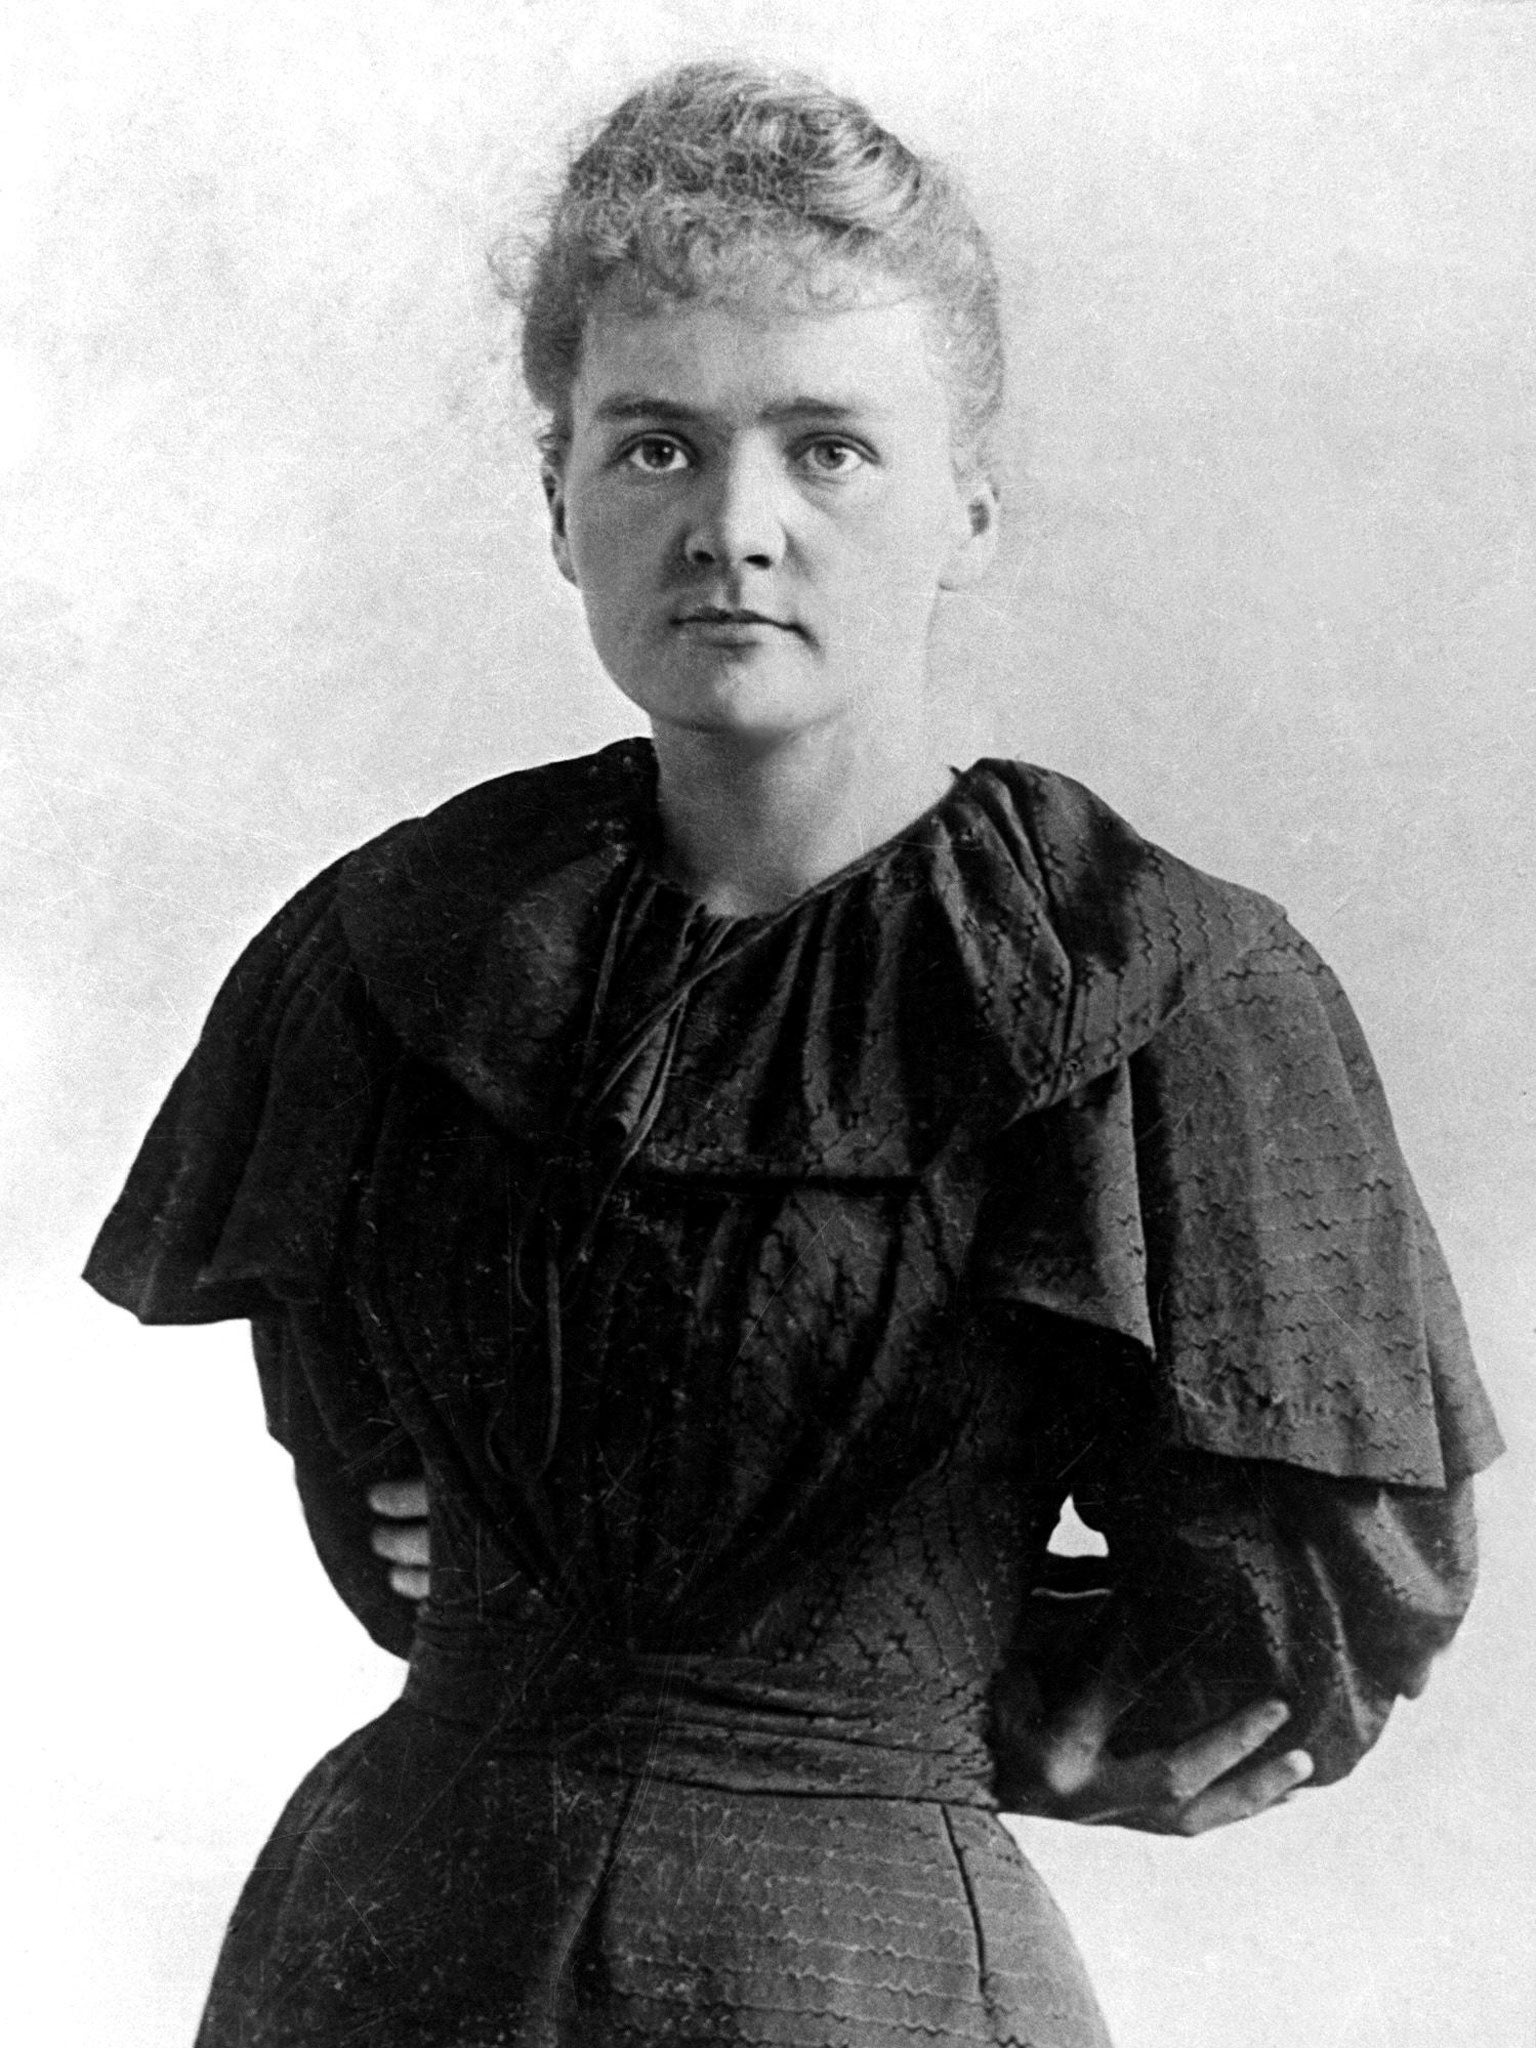 Marie Sklodowska, in a picture dated around 1895. She received her early scientific training from her father